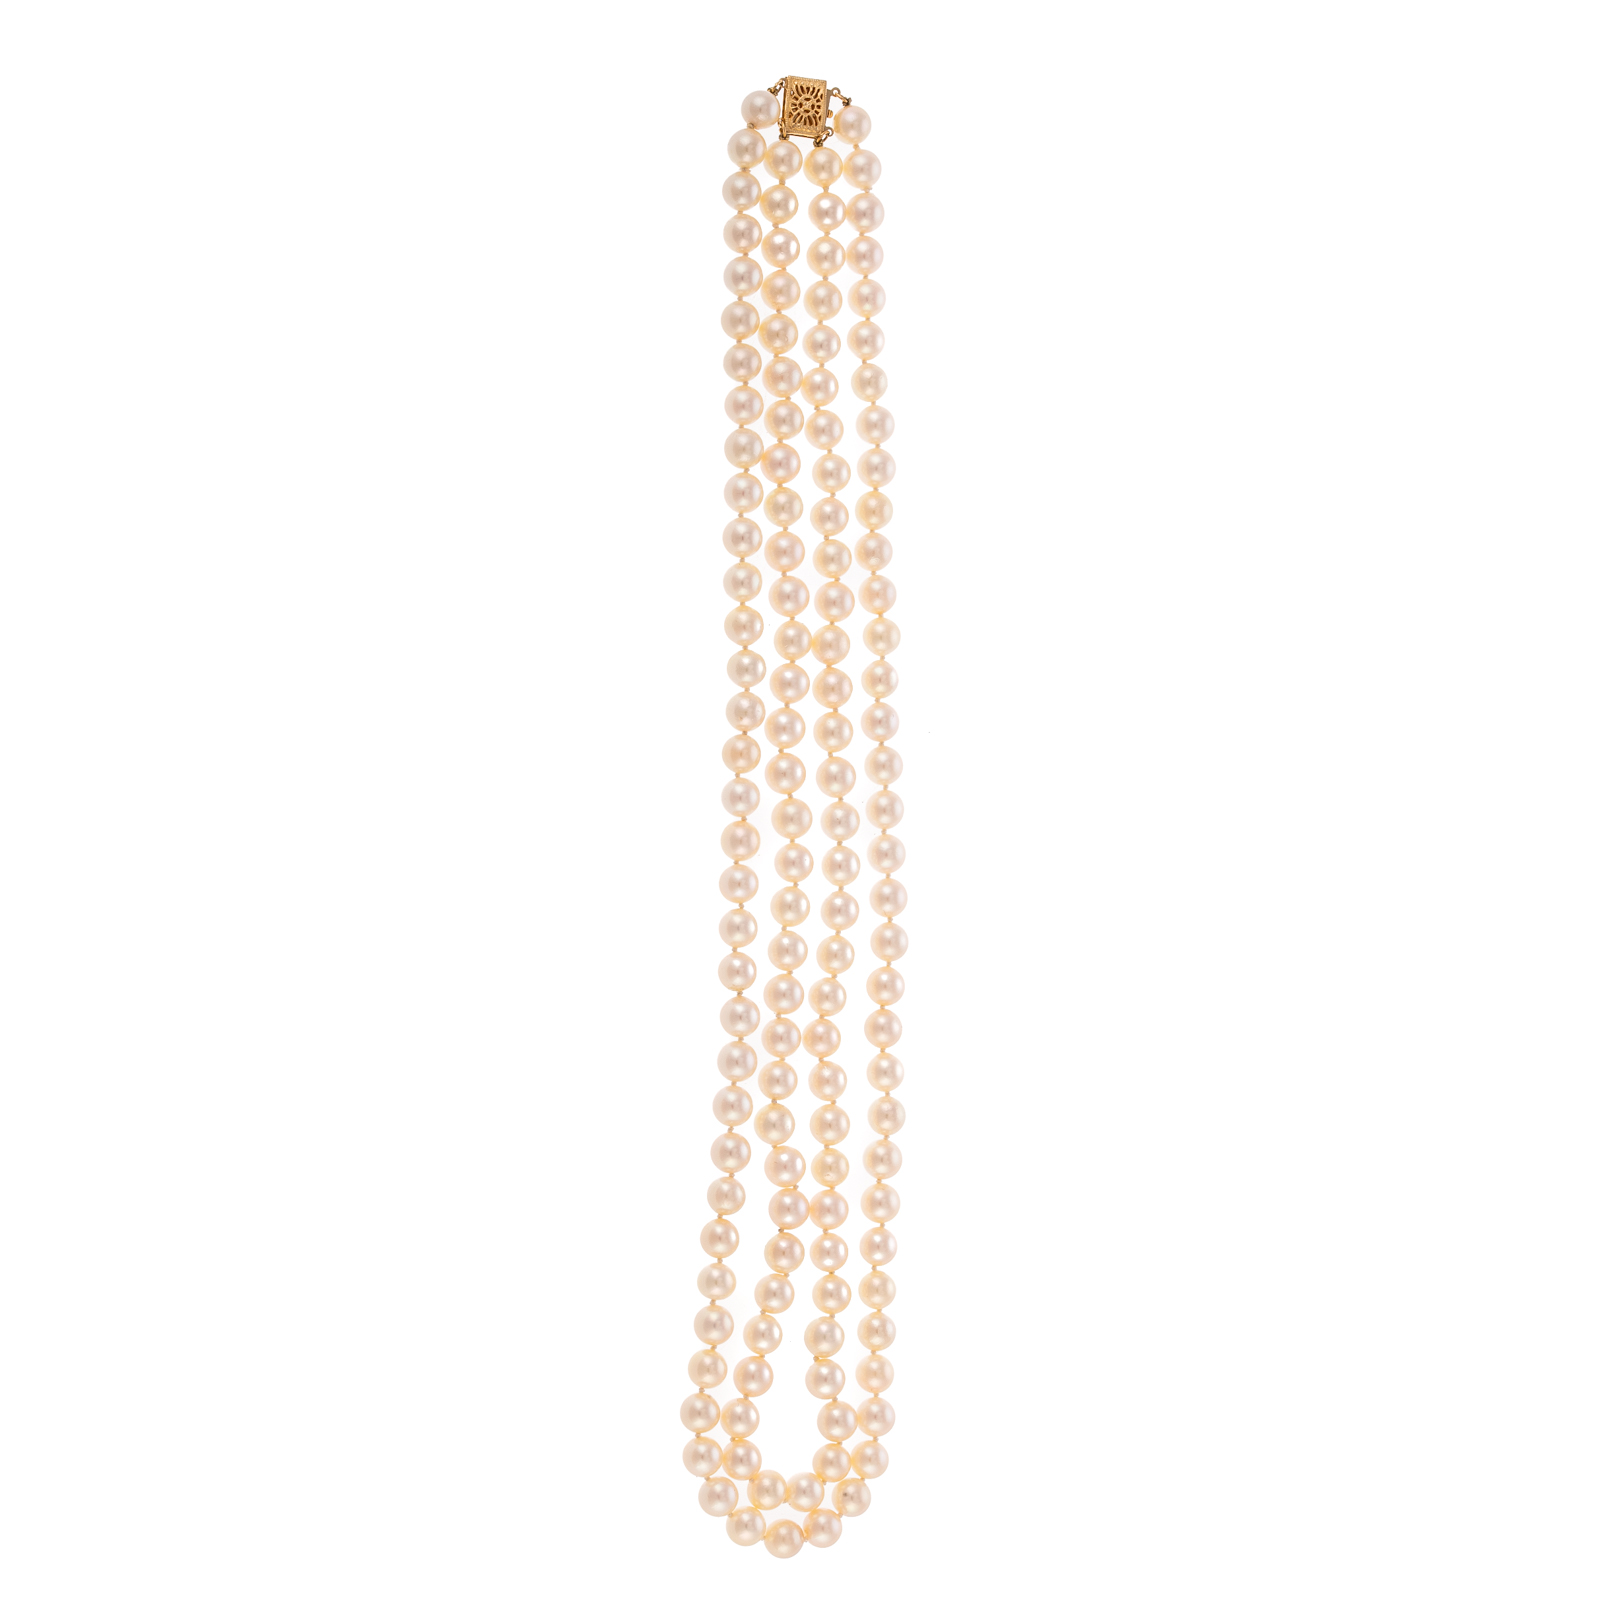 A DOUBLE STRAND AKOYA PEARL NECKLACE 3386ca